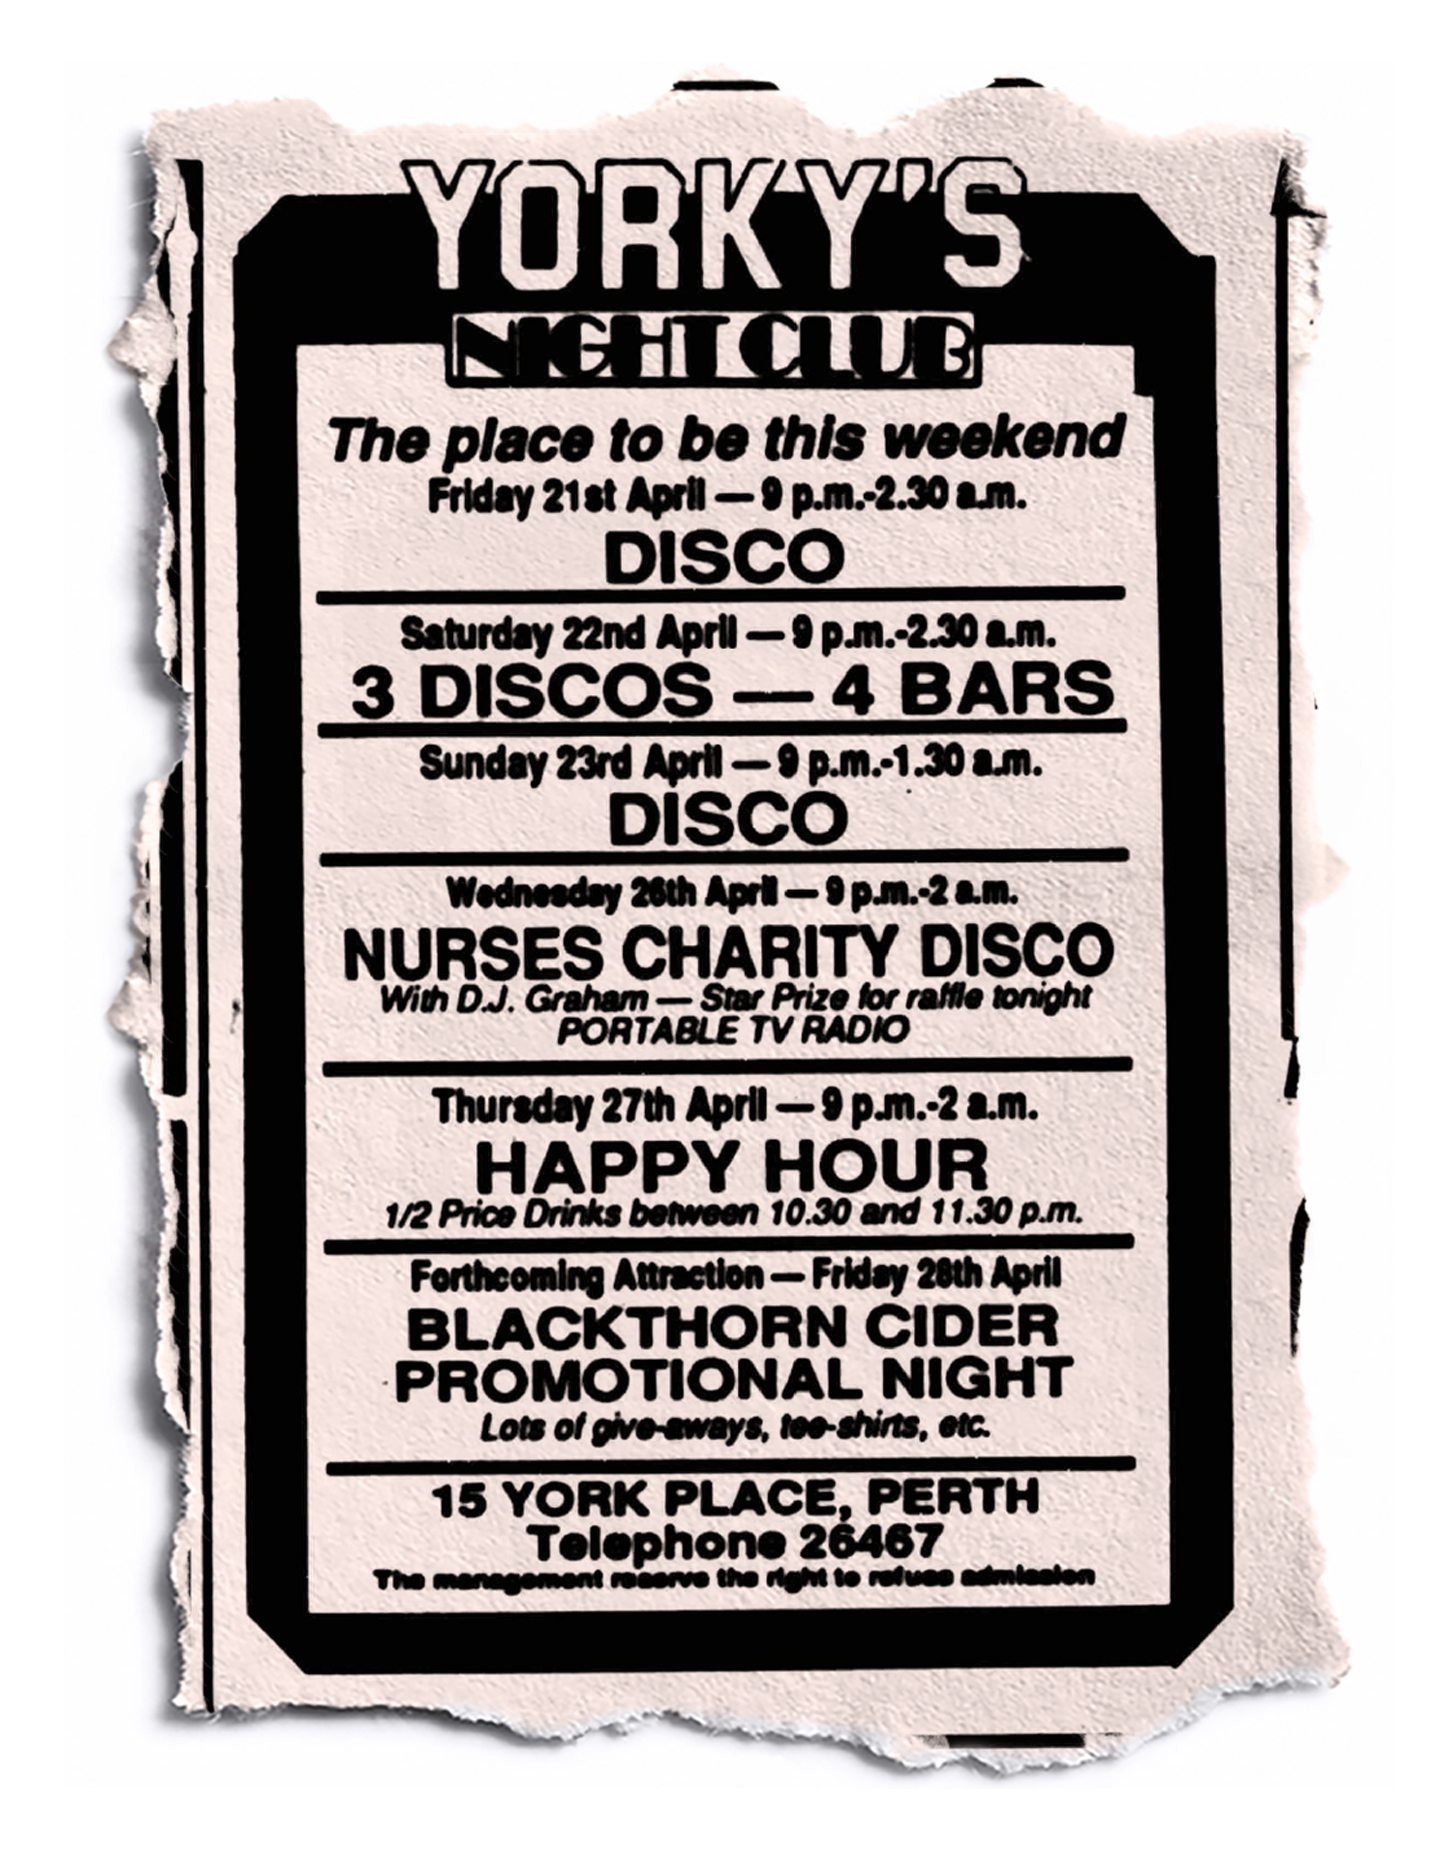 A flyer showing How the week at Yorky's looked in 1989.